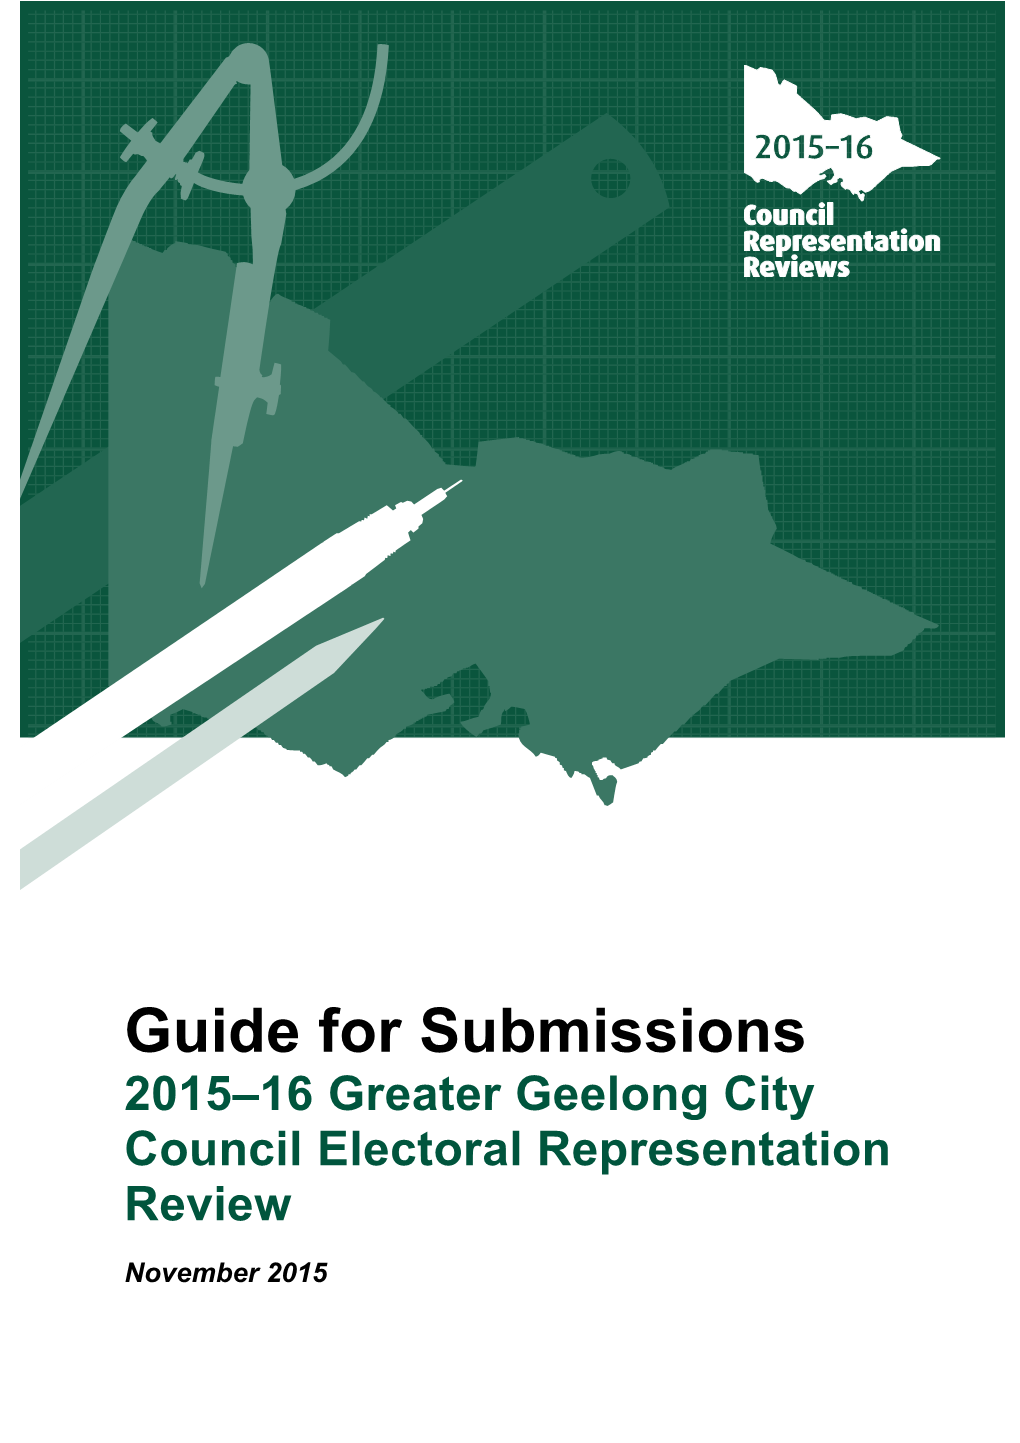 Guide for Submissions: 0 Greater Geelong City Council Electoral Representation Review